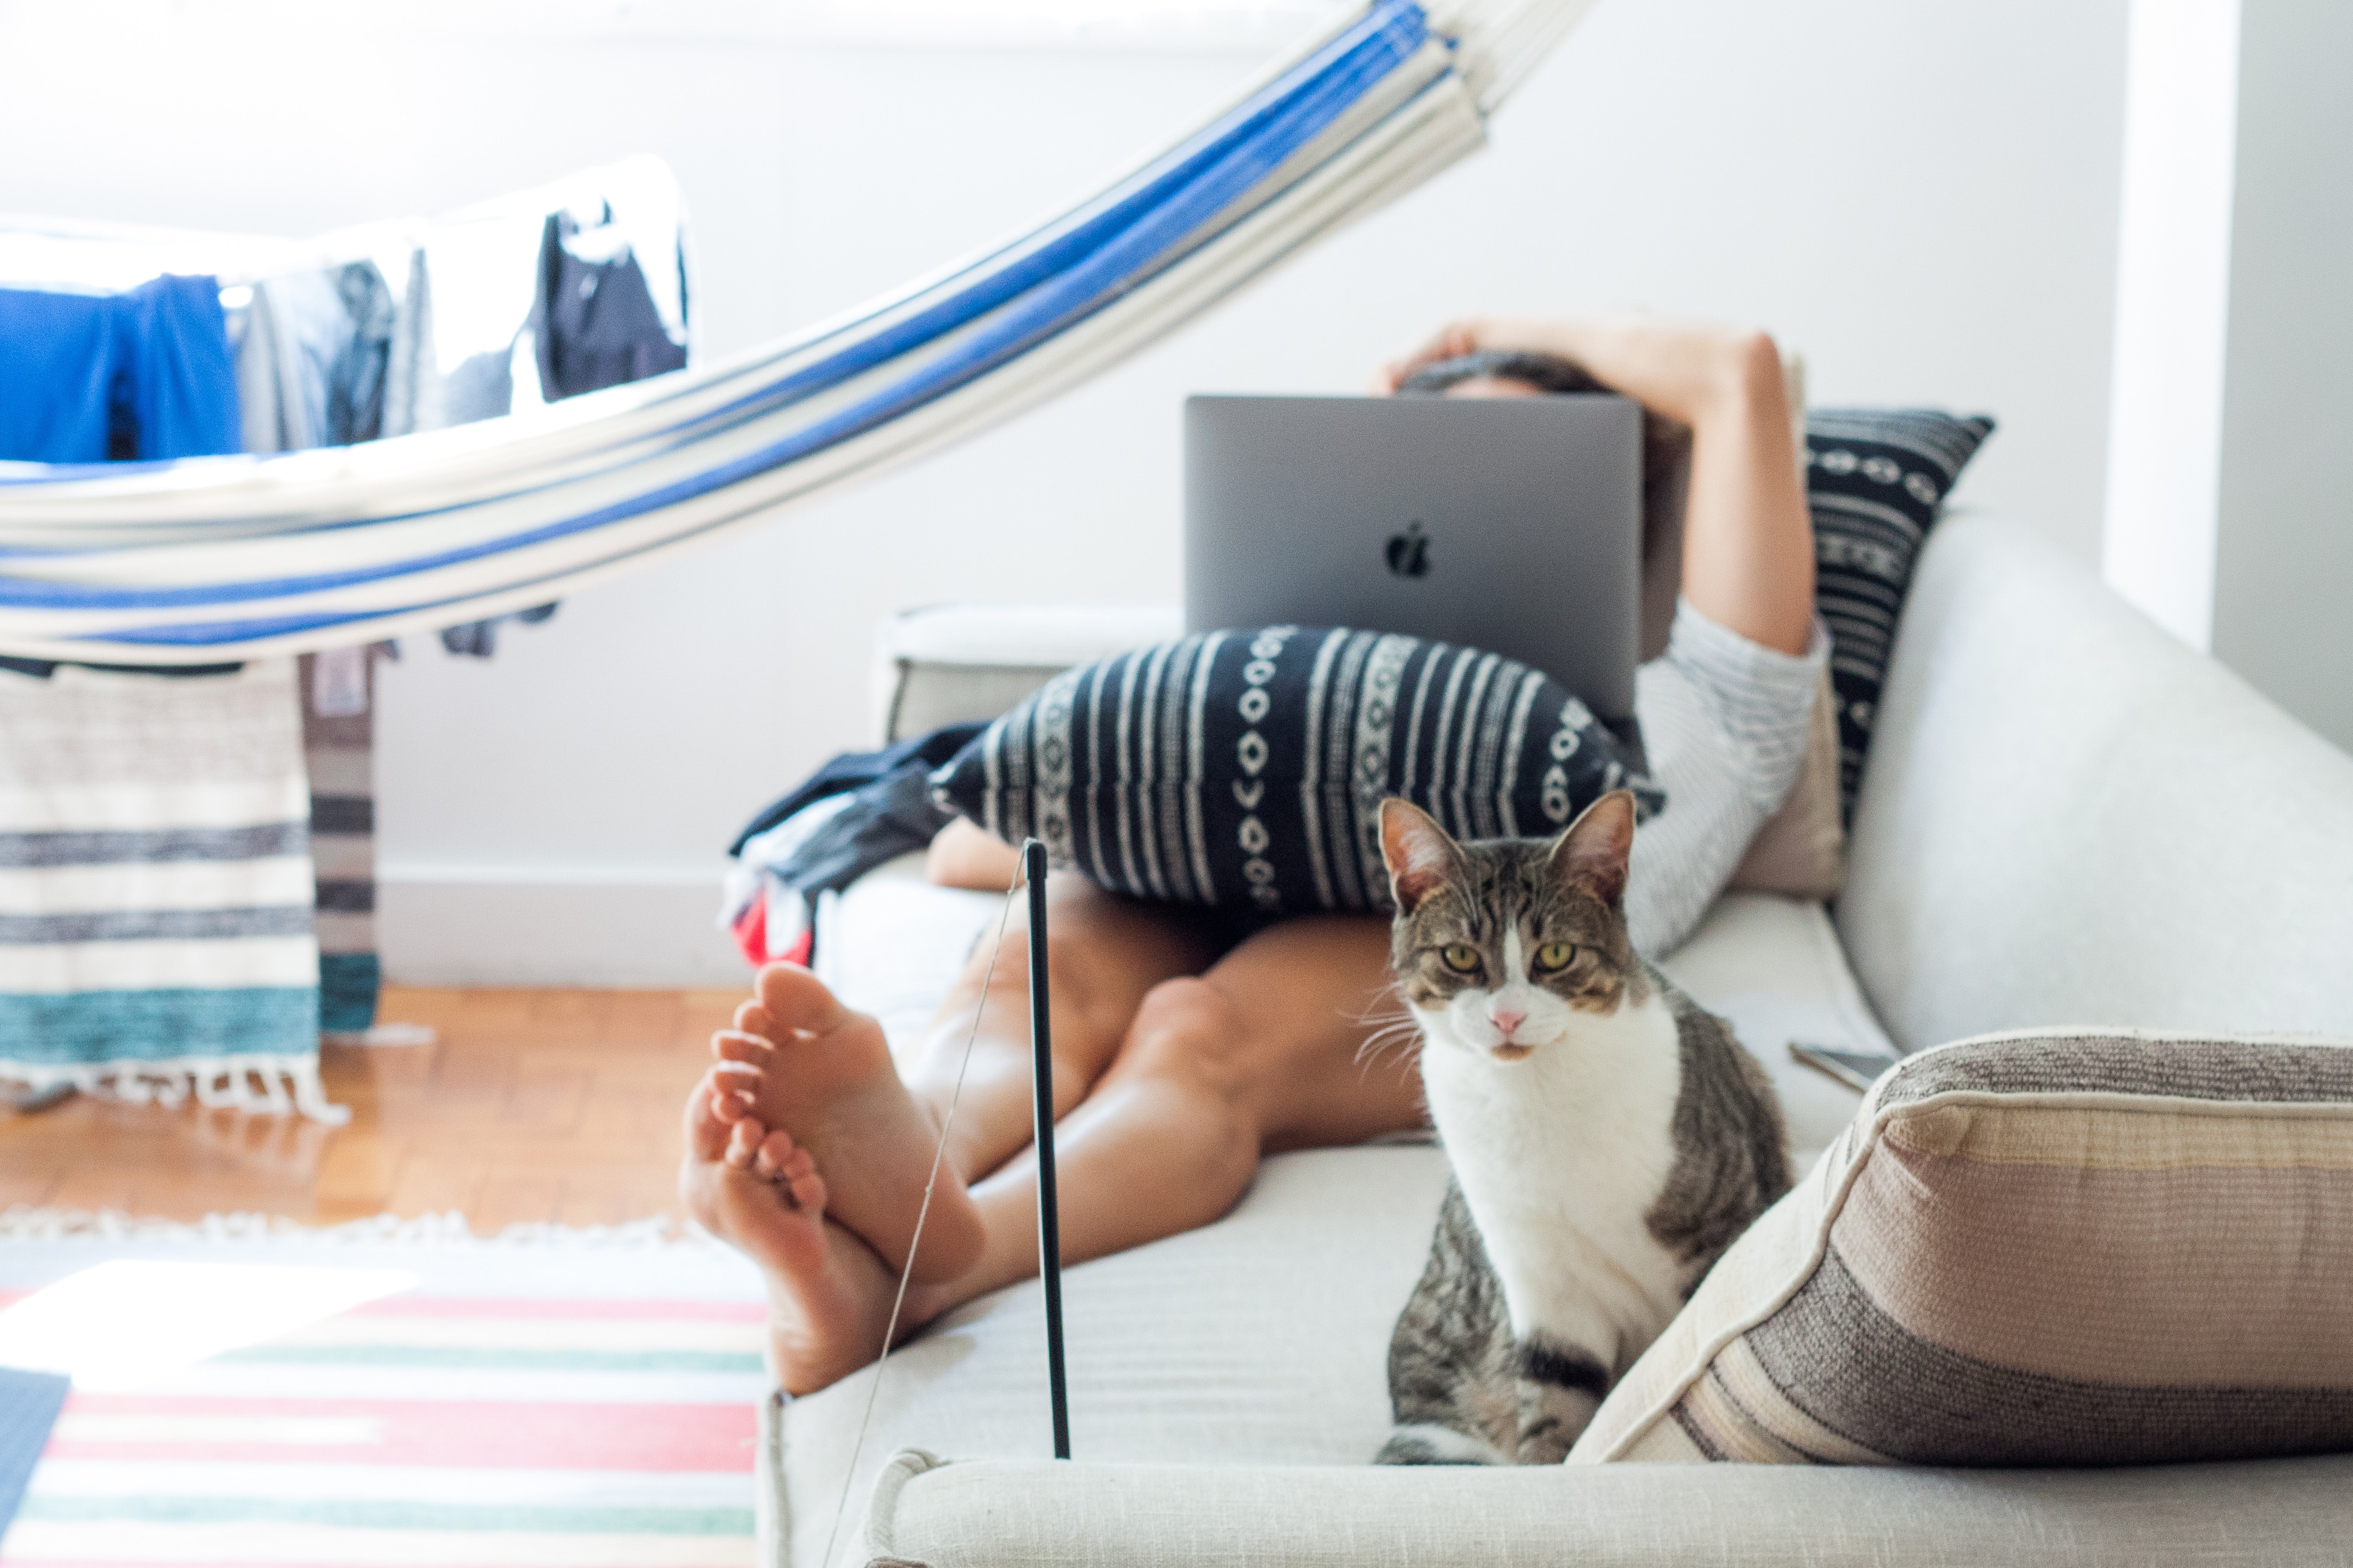 Woman Lying on Sofa With Cat by Her Foot, Adorable, Woman, Whiskers, Wear, HQ Photo